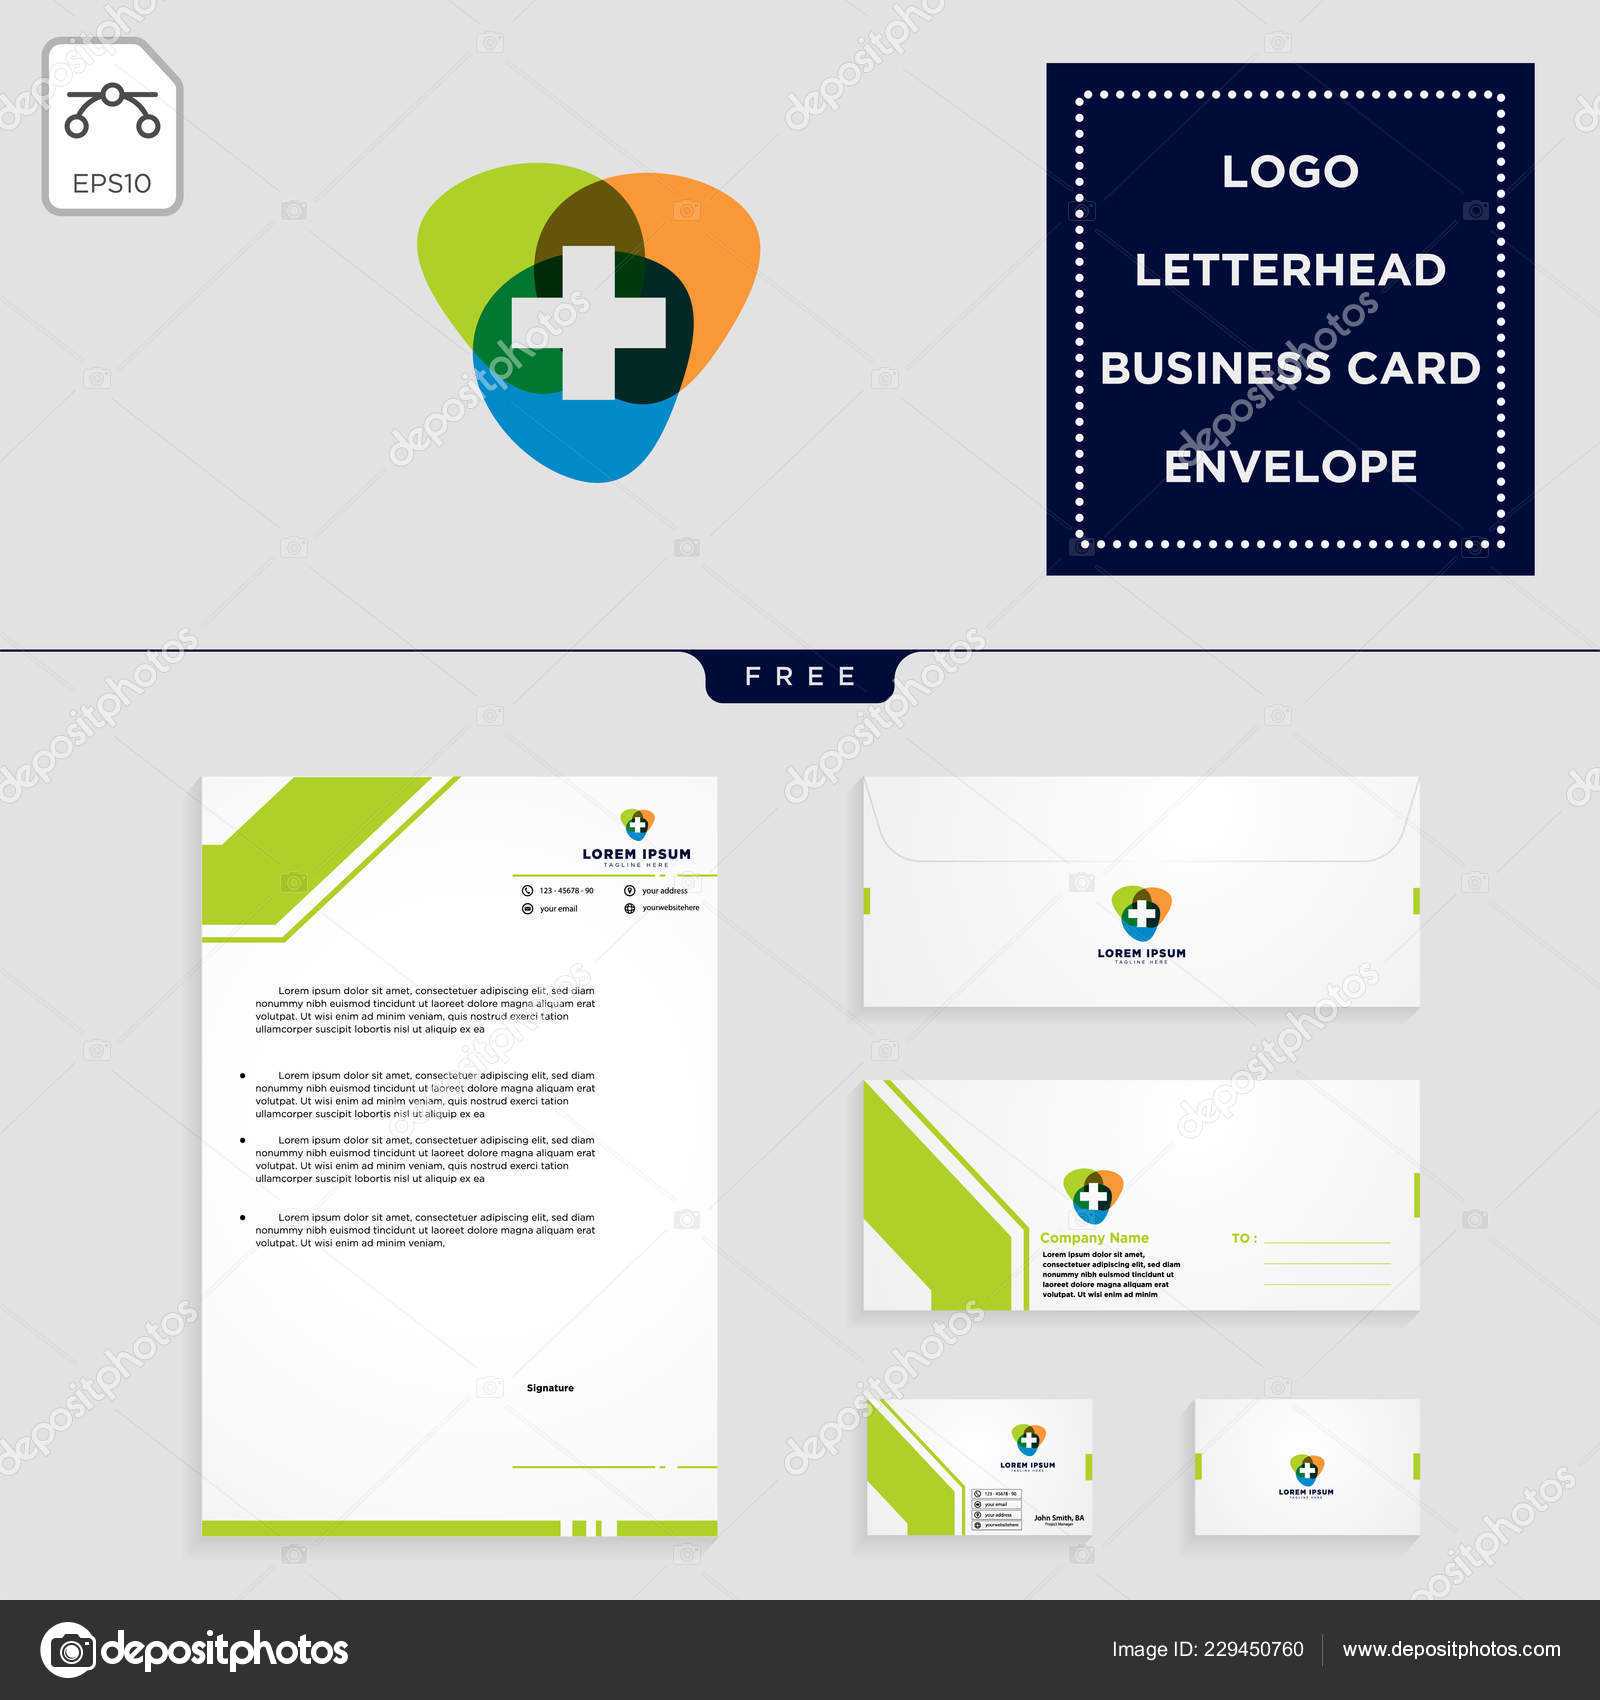 Medical Cross Logo Template Vector Illustration Free Within Business Card Letterhead Envelope Template